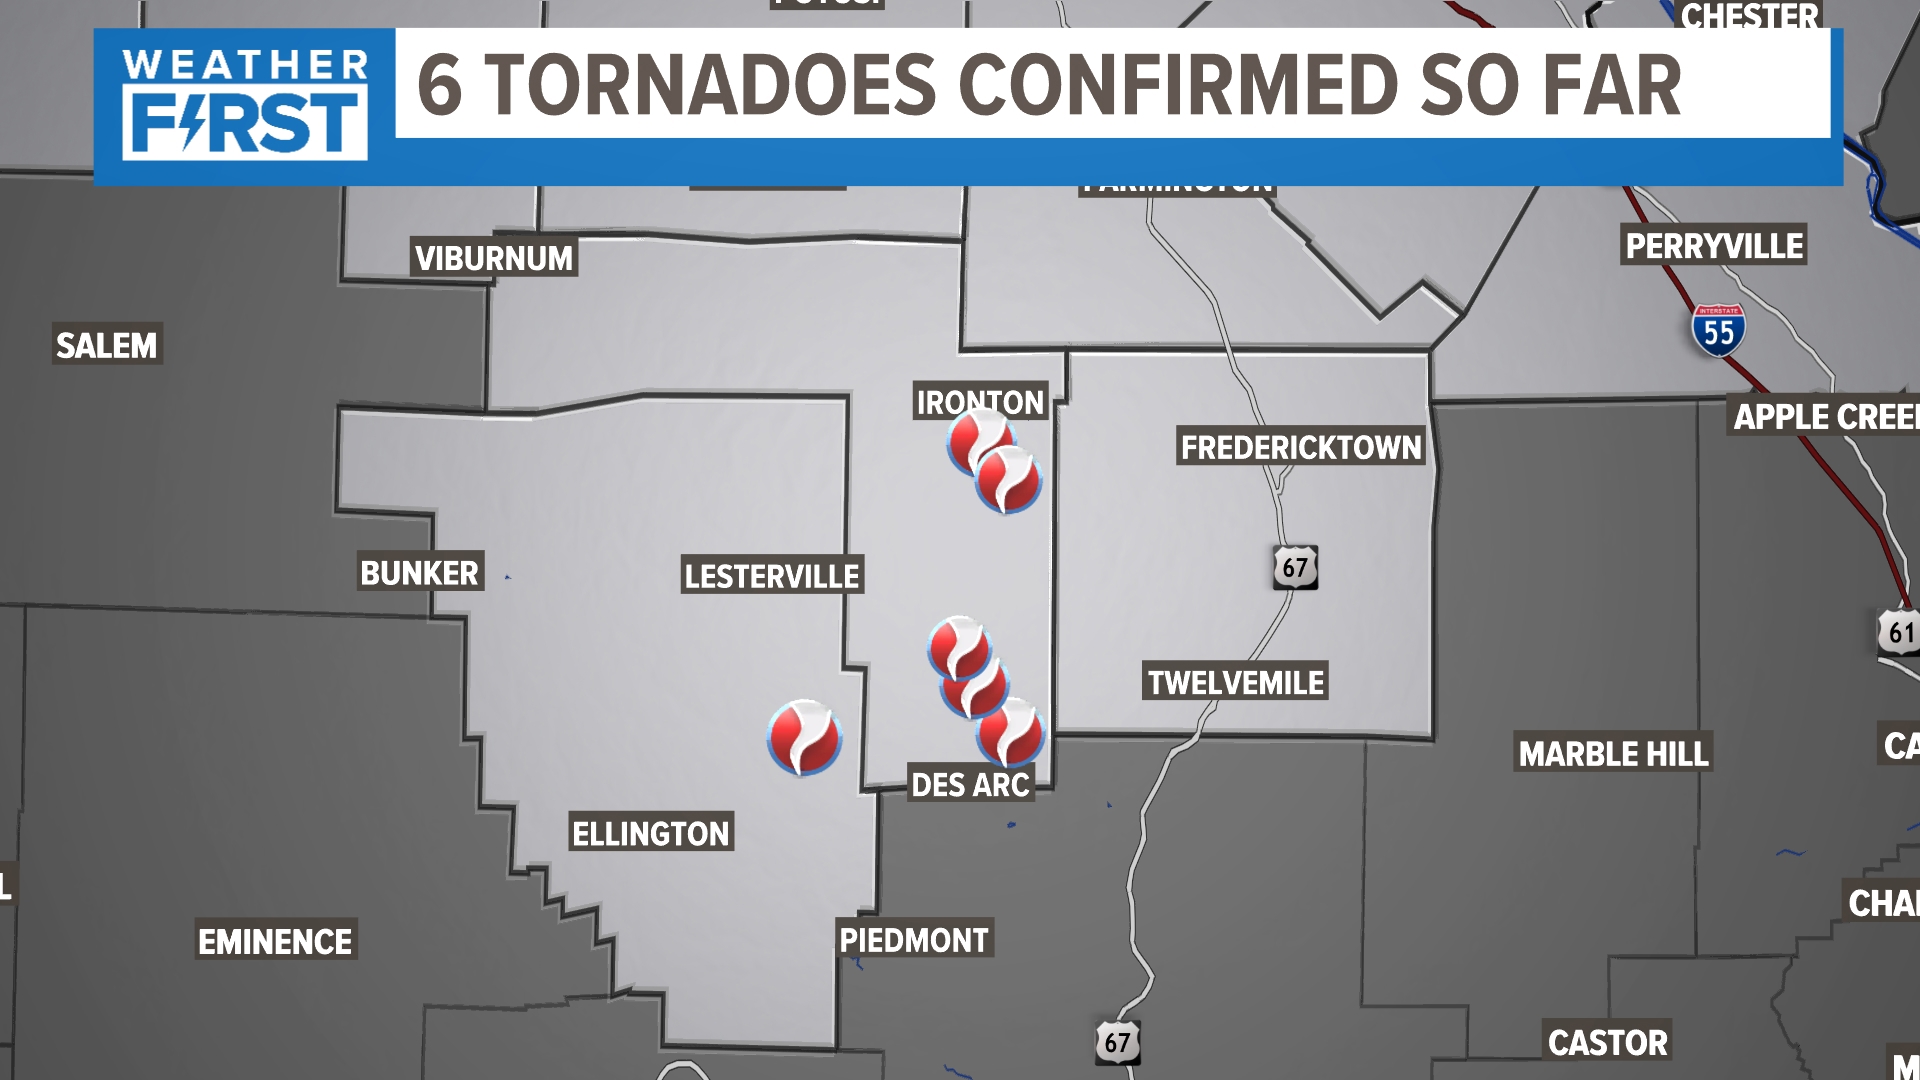 At least six tornadoes touched down in the St. Louis area during Wednesday's severe storms, with more likely to be confirmed as damage surveys continue.